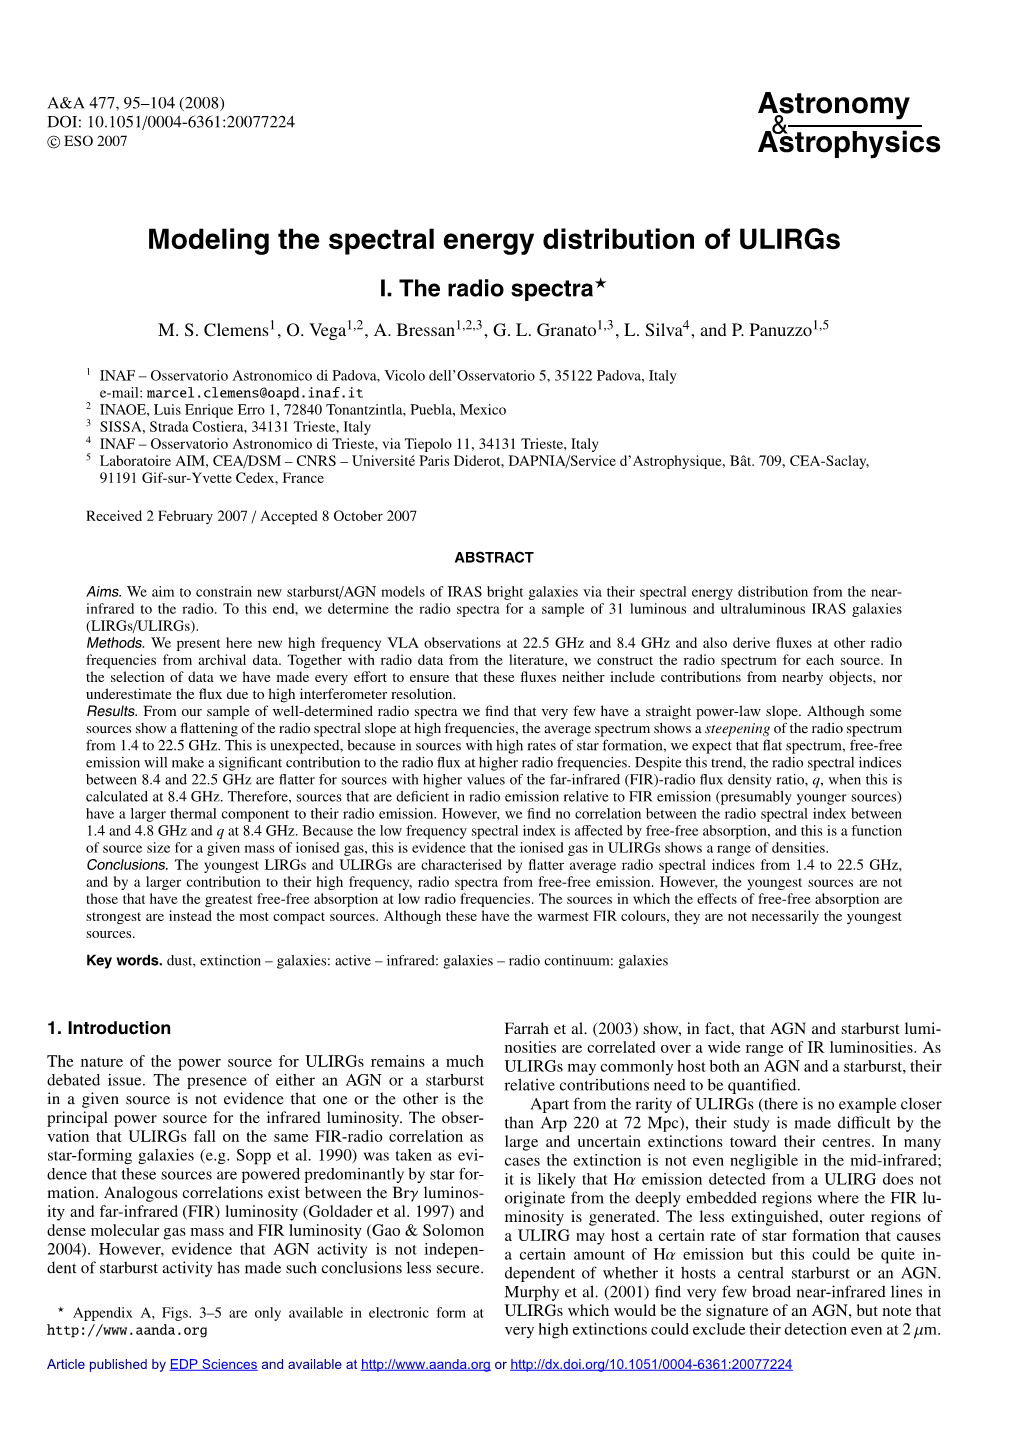 Modeling the Spectral Energy Distribution of Ulirgs I